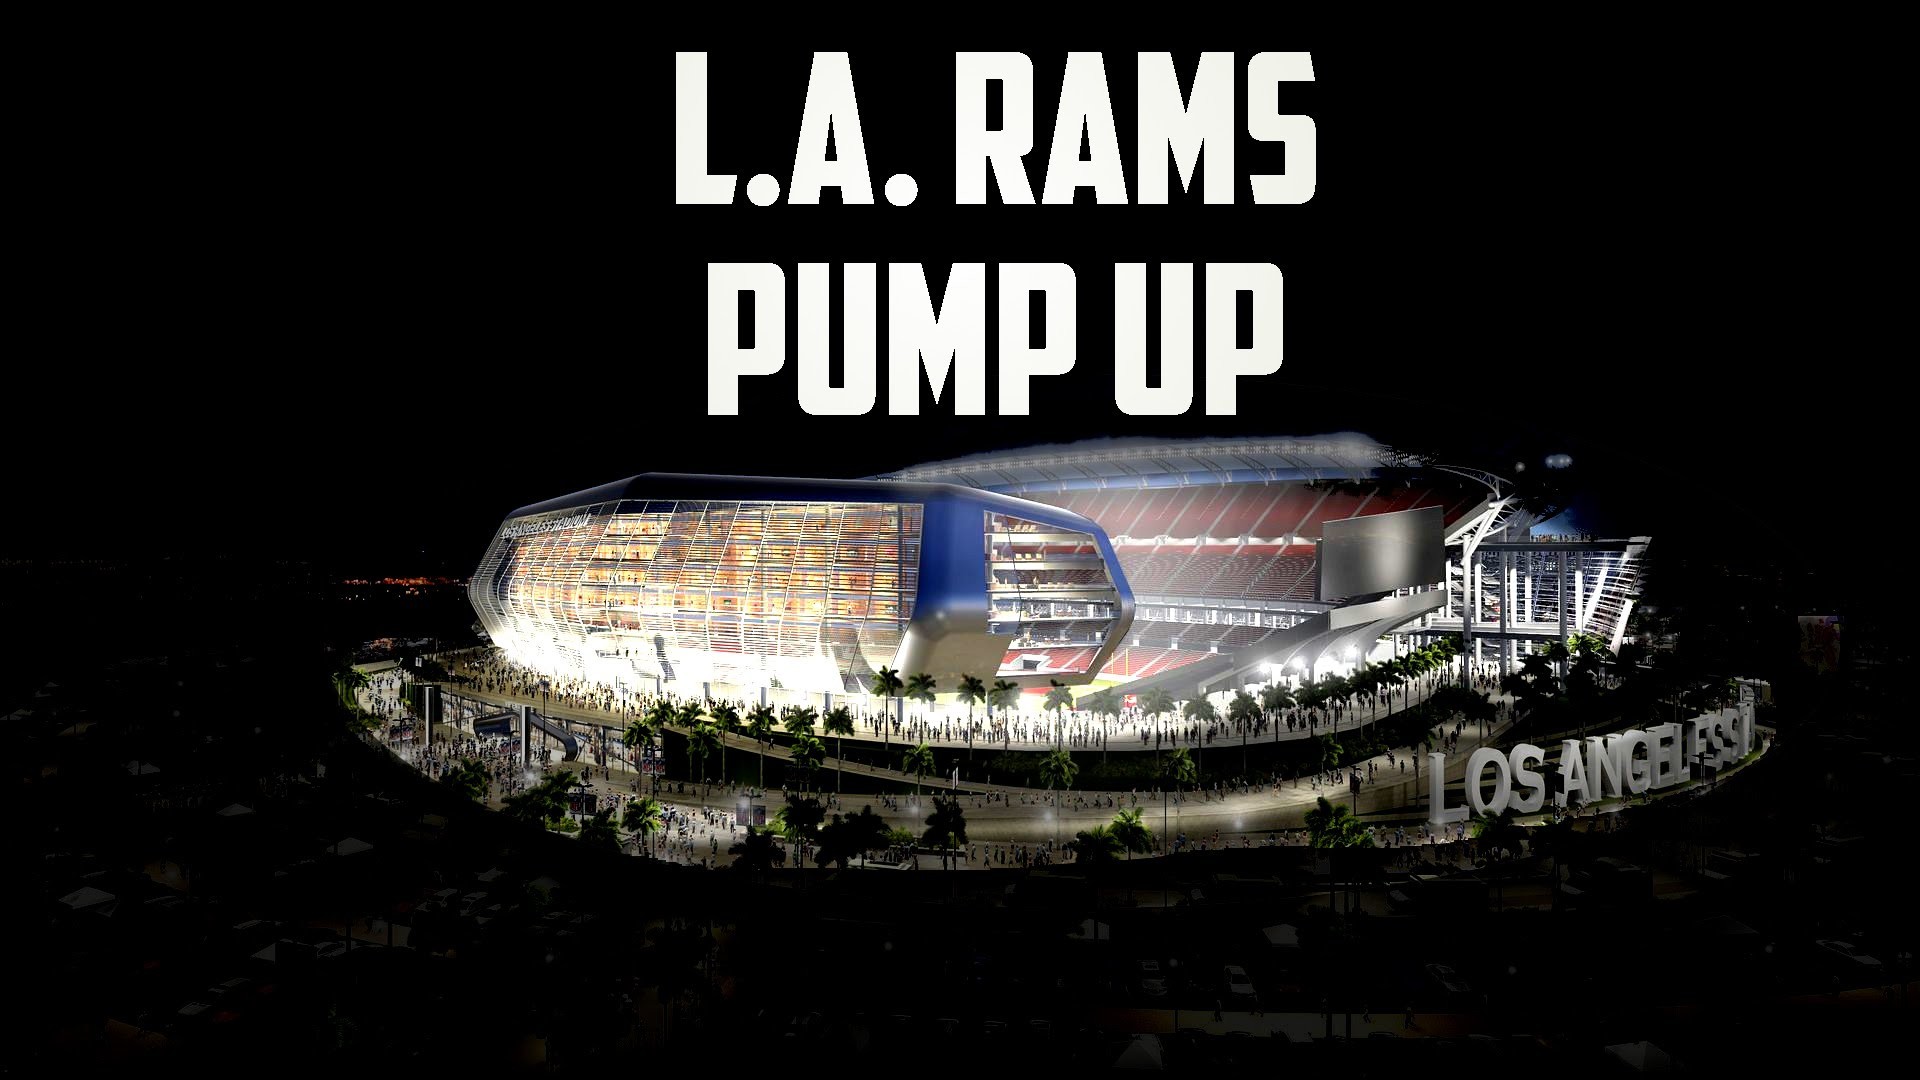 1920x1080 Los Angeles Rams Pump Up! "Welcome Back"